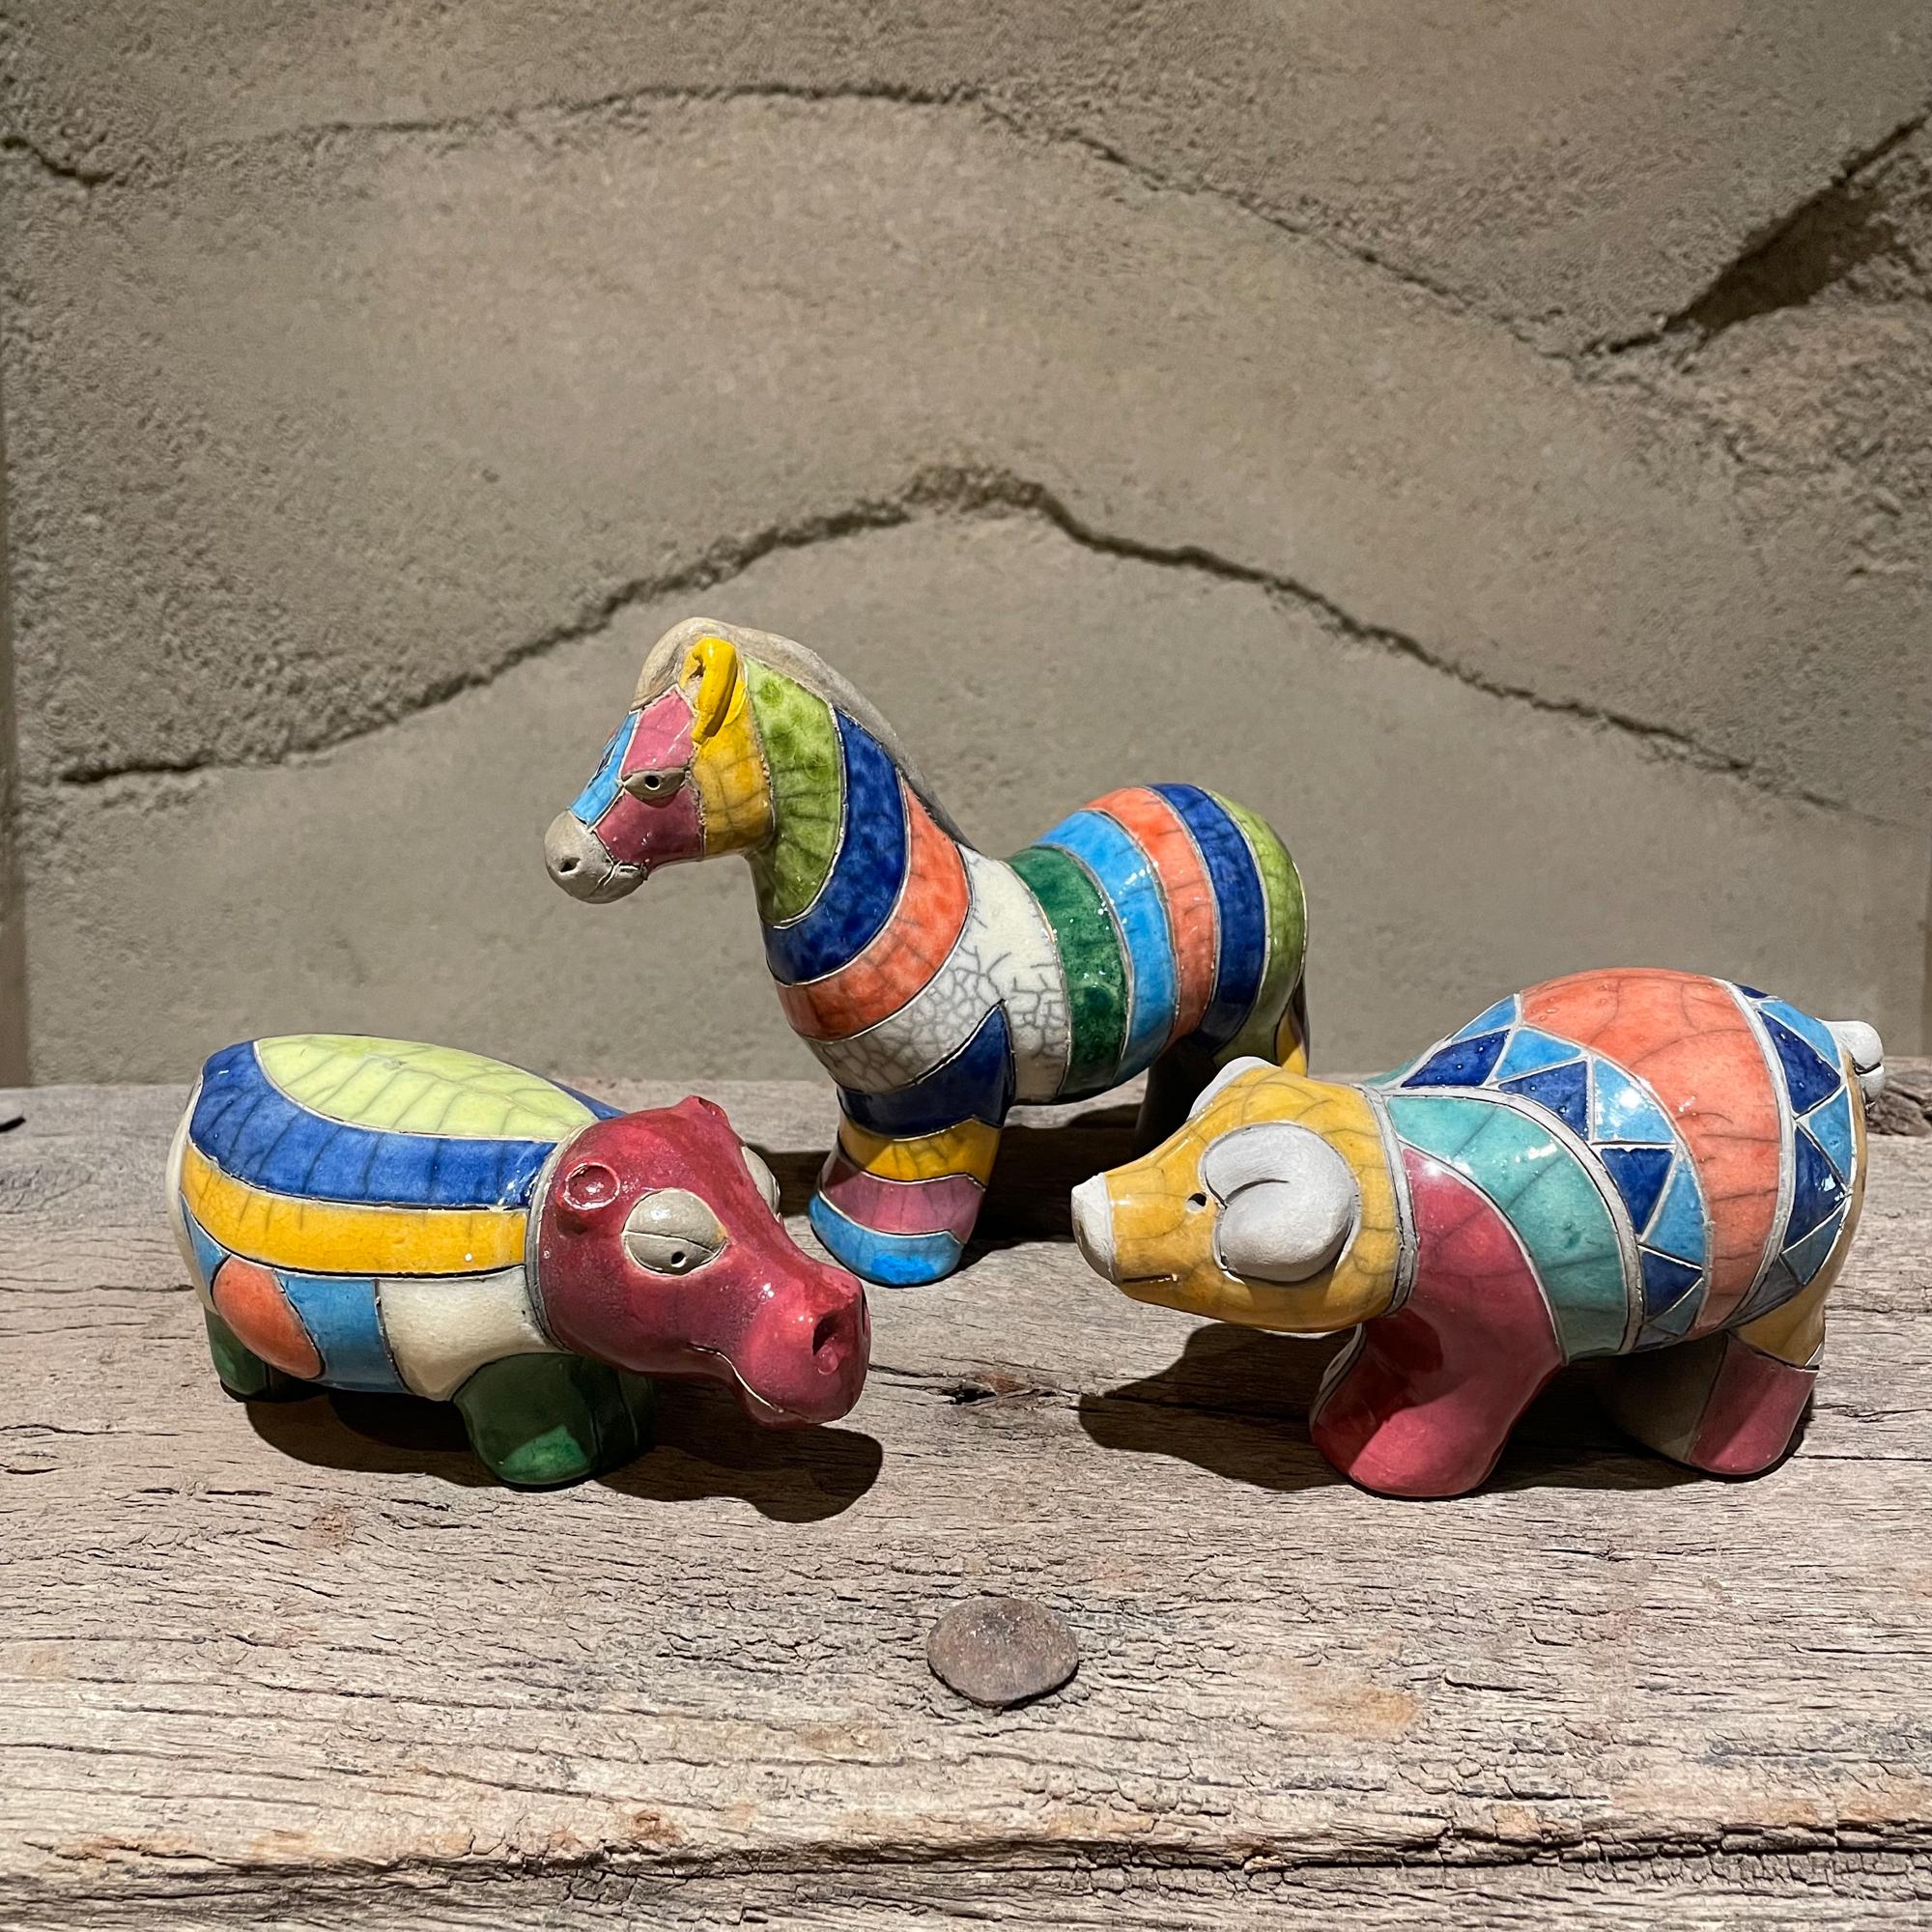 1970s Colorful Rainbow Animal Collection Set of Three
Horse 5.5H x 7D x 2.5W  Hippo 2.75H 6D x 3W   Pig 3.5T x 6L x 3W
Ceramic-pottery with a Colorful glazed finish 
Wonderful lines and patterns.
Original Vintage Preowned unrestored condition. Not